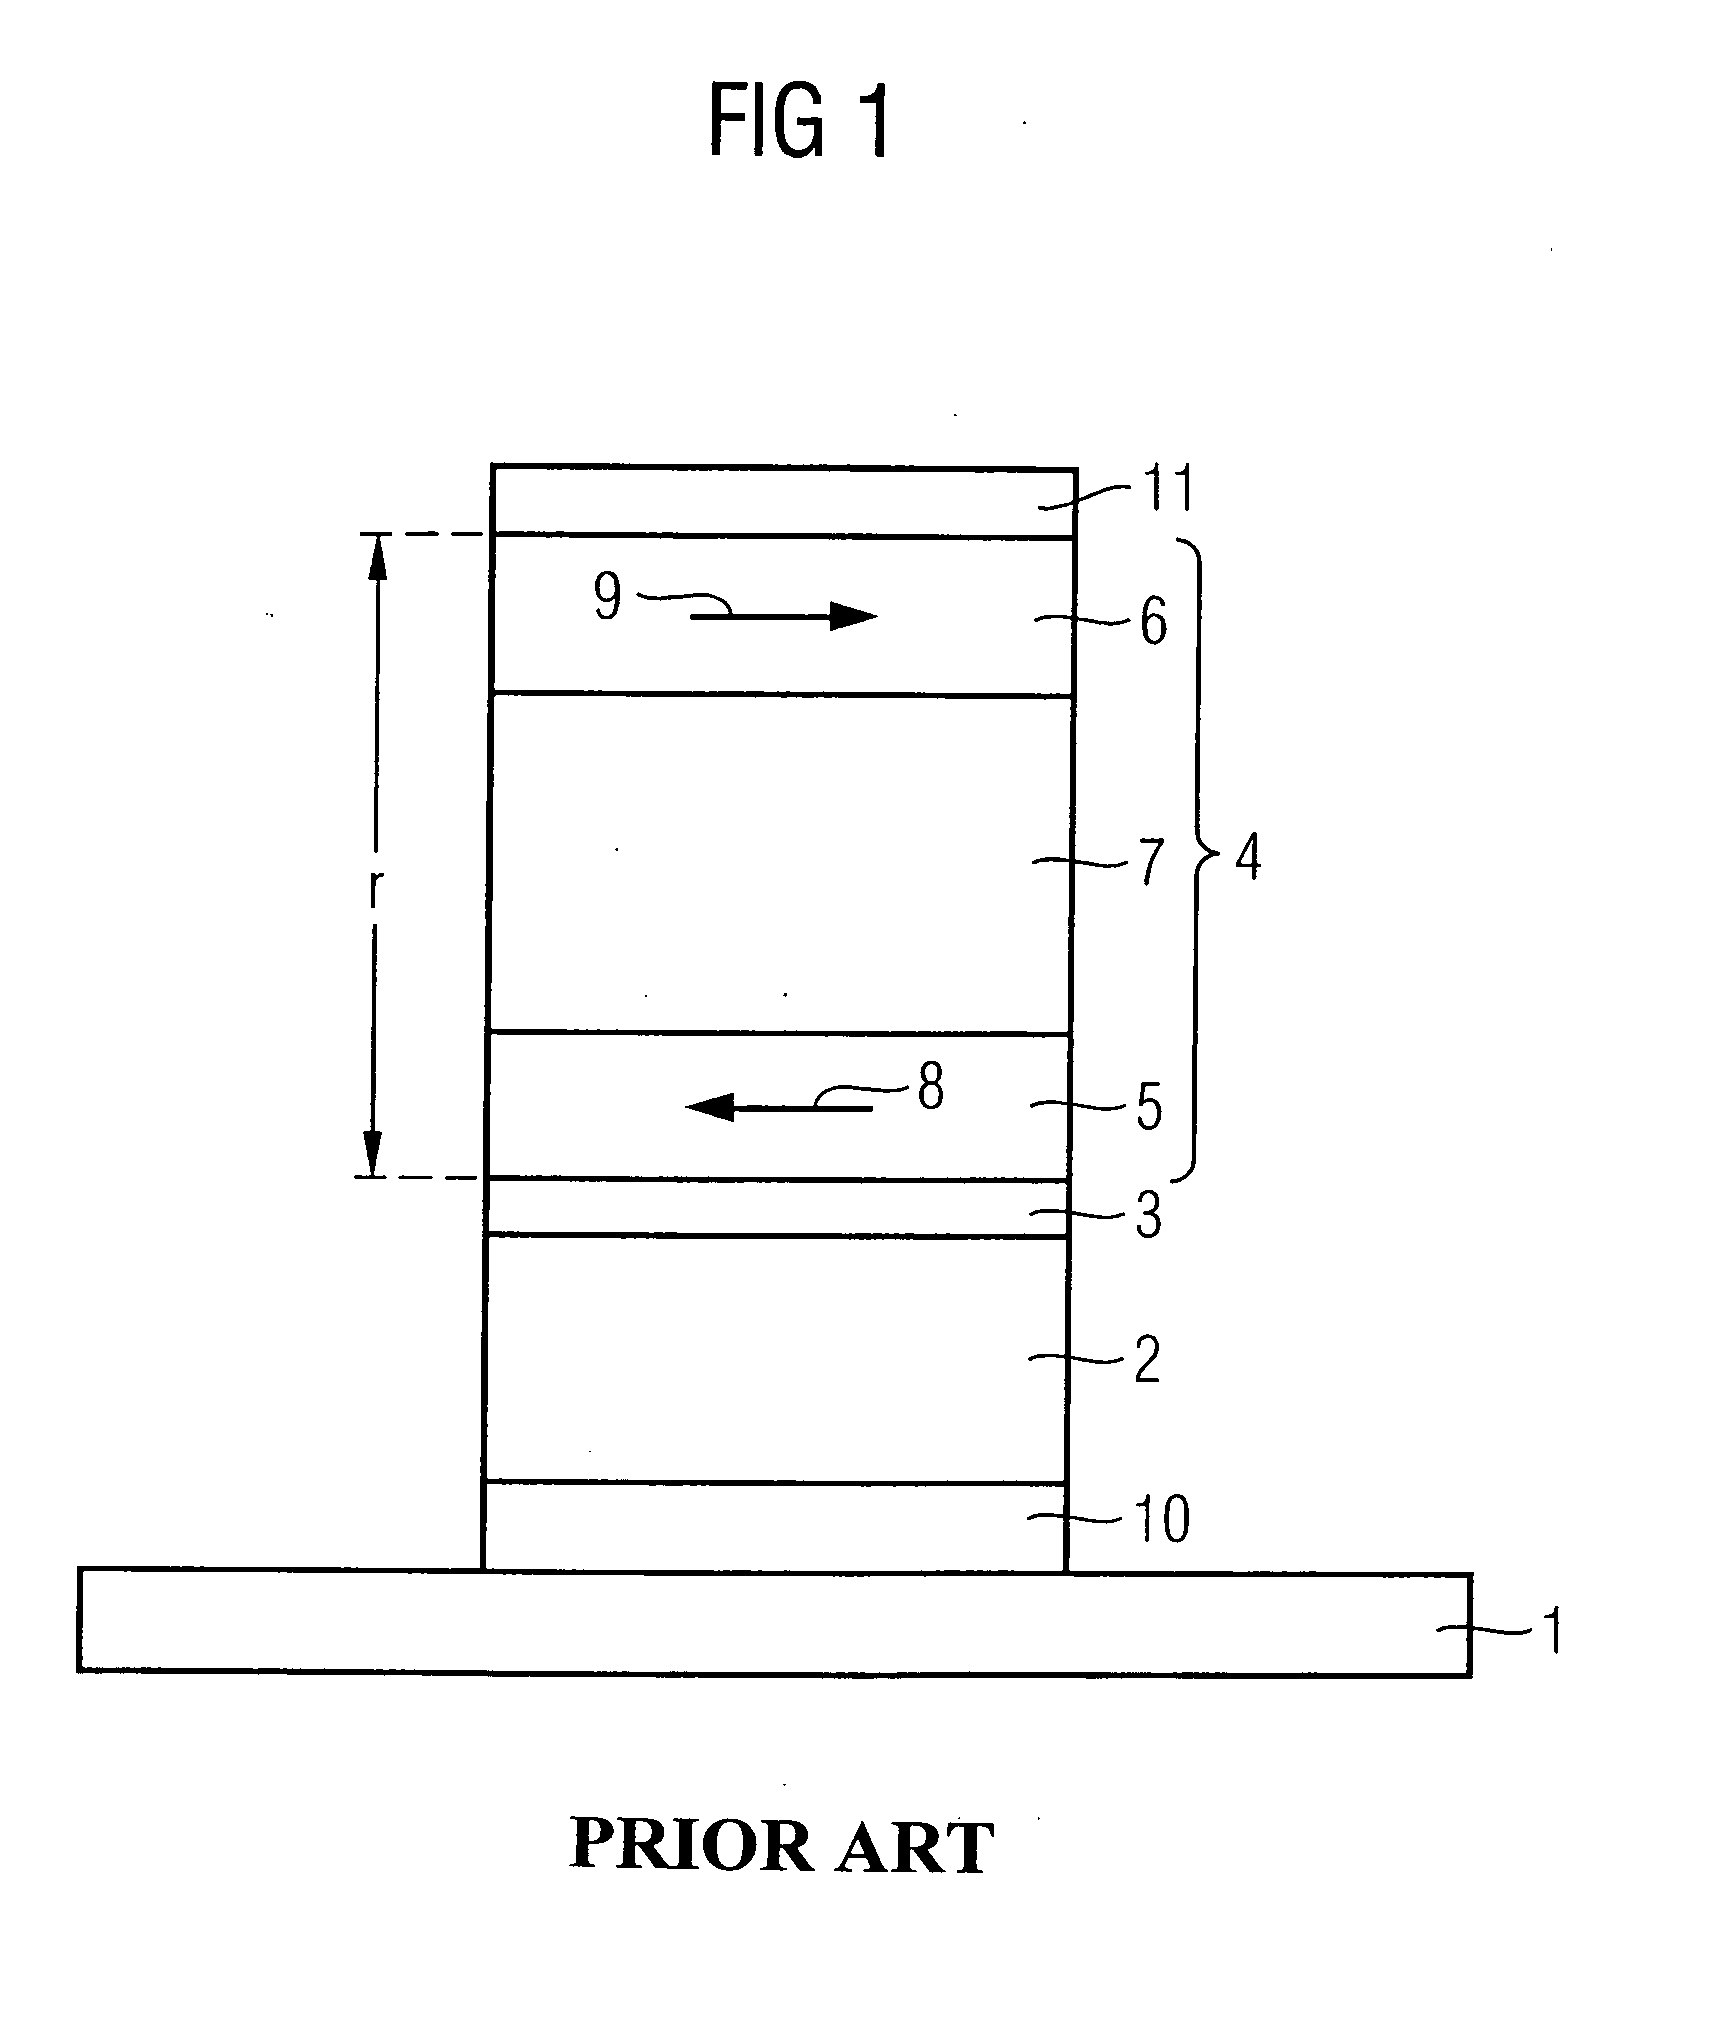 Adiabatic rotational switching memory element including a ferromagnetic decoupling layer